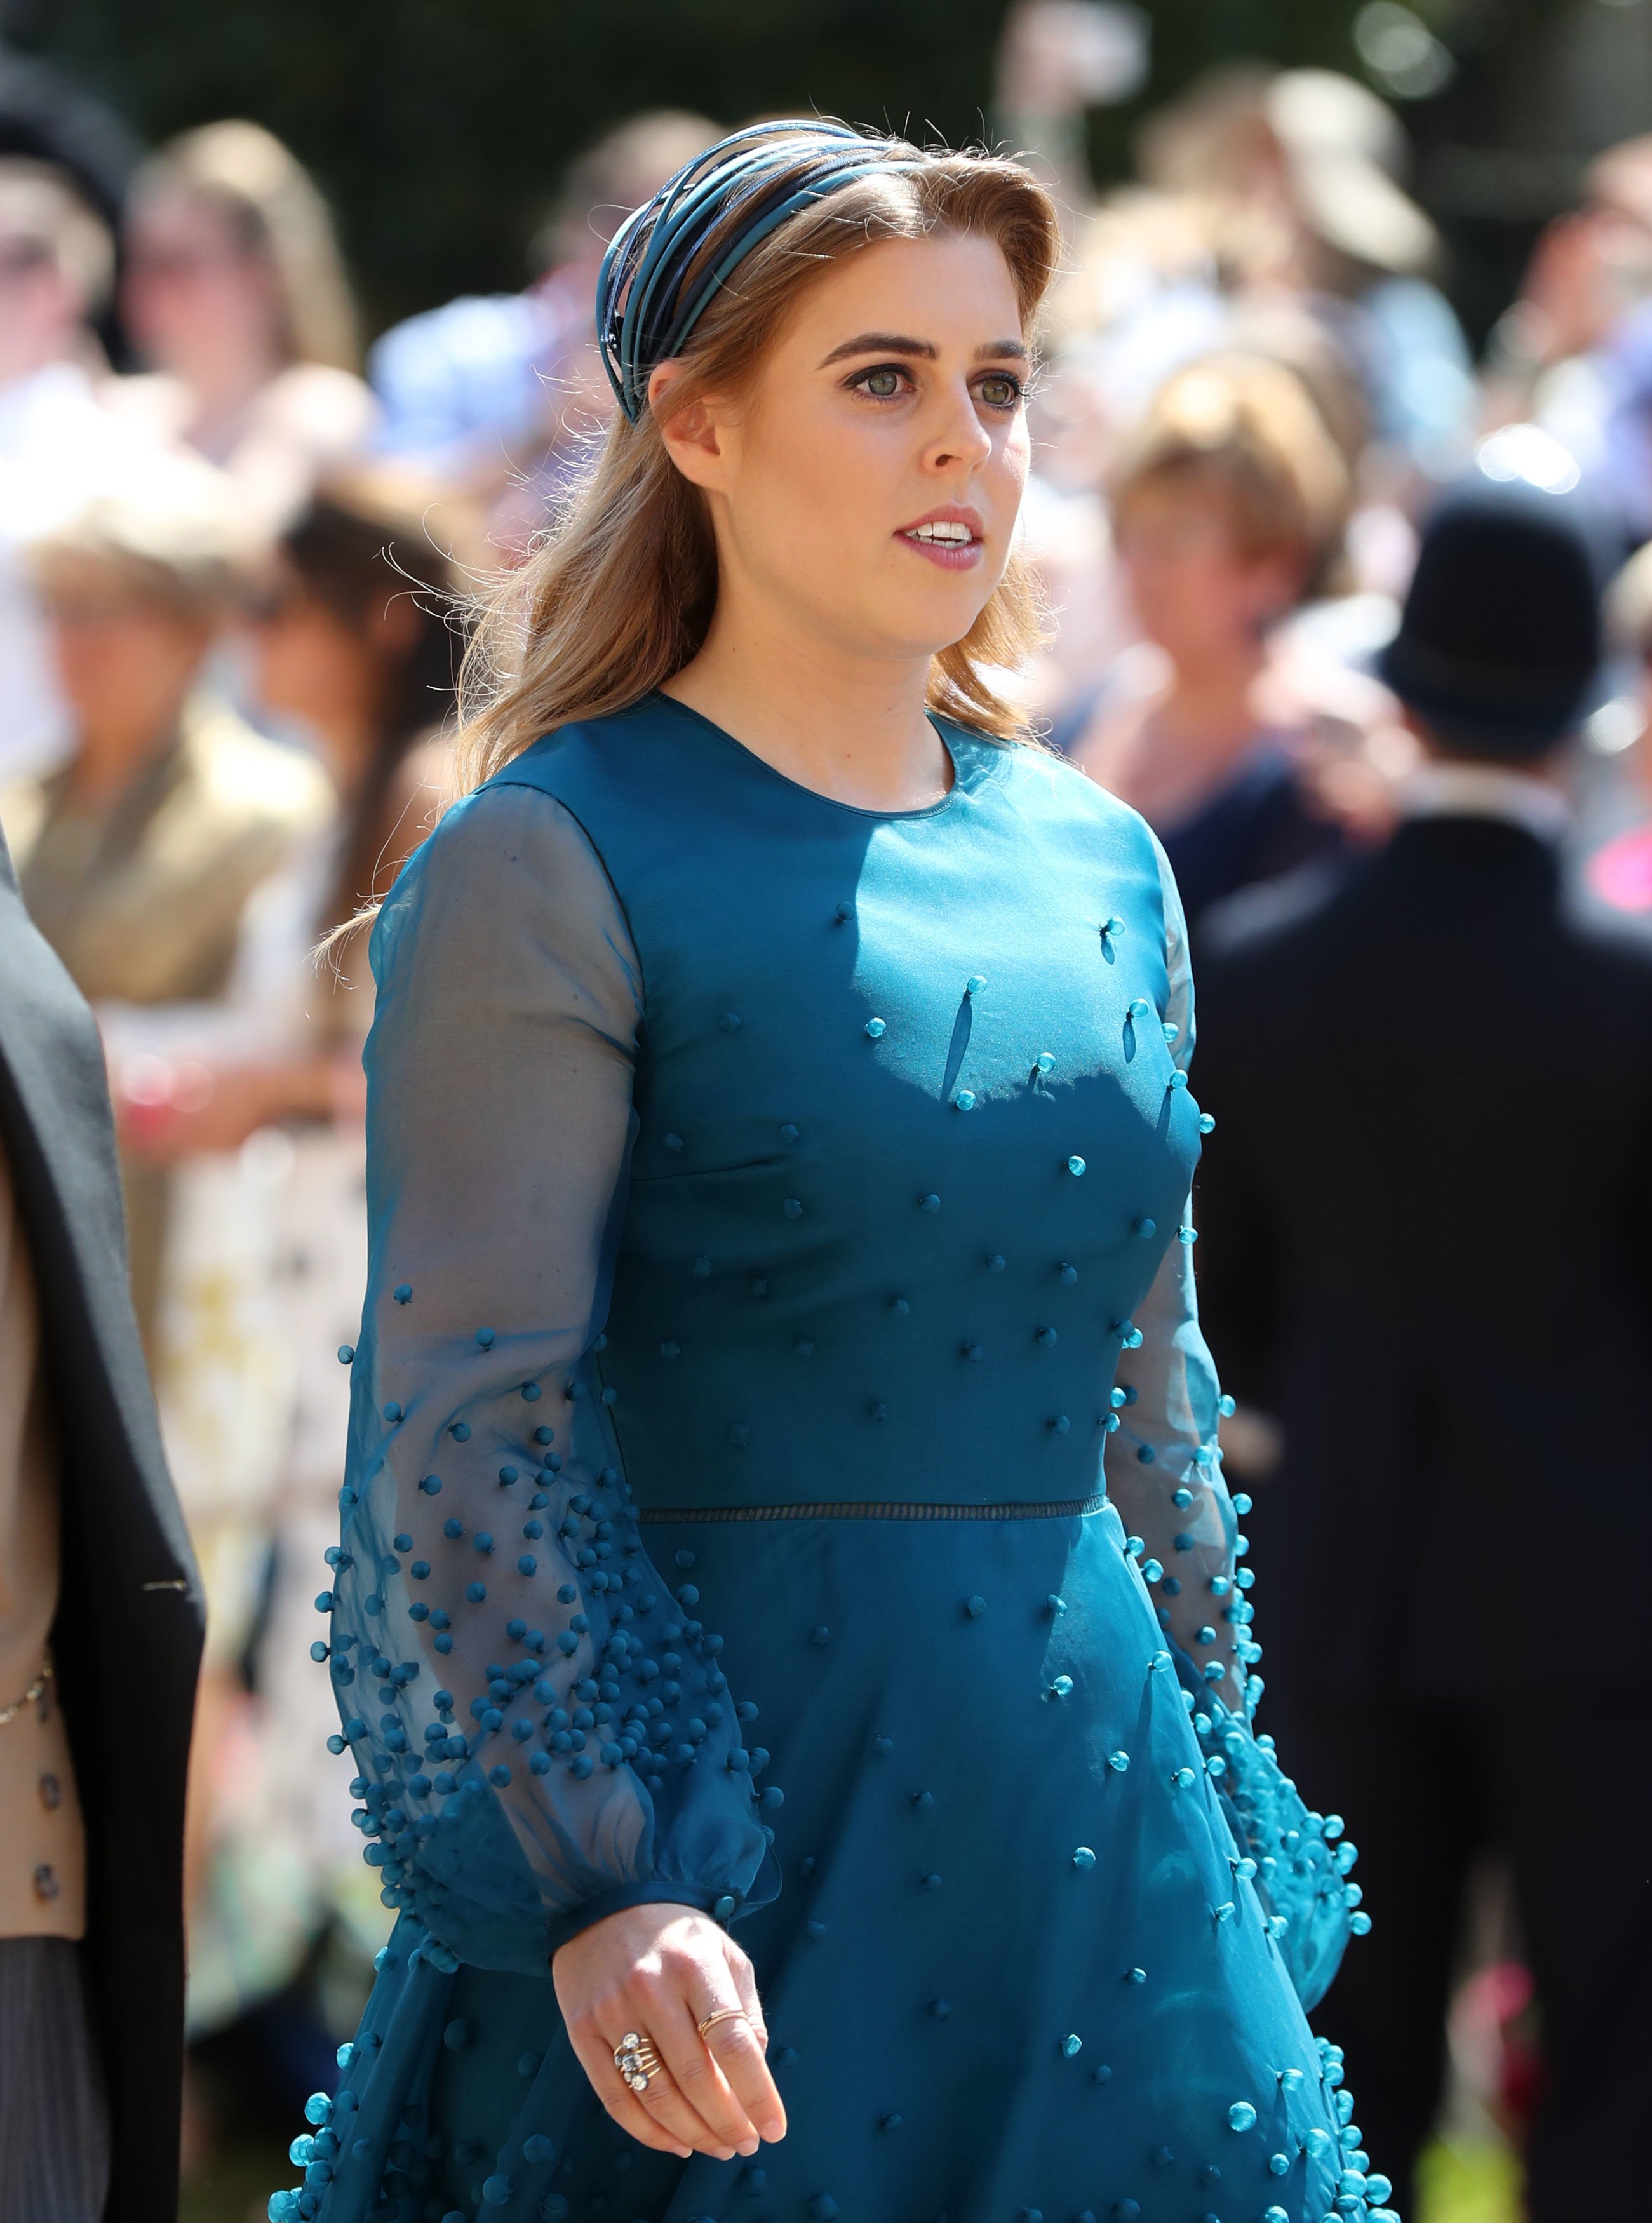 Princess Beatrice arrives at St George's Chapel at Windsor Castle before the wedding of Prince Harry to Meghan Markle on May 19, 2018 in Windsor, England | Photo: Getty Images